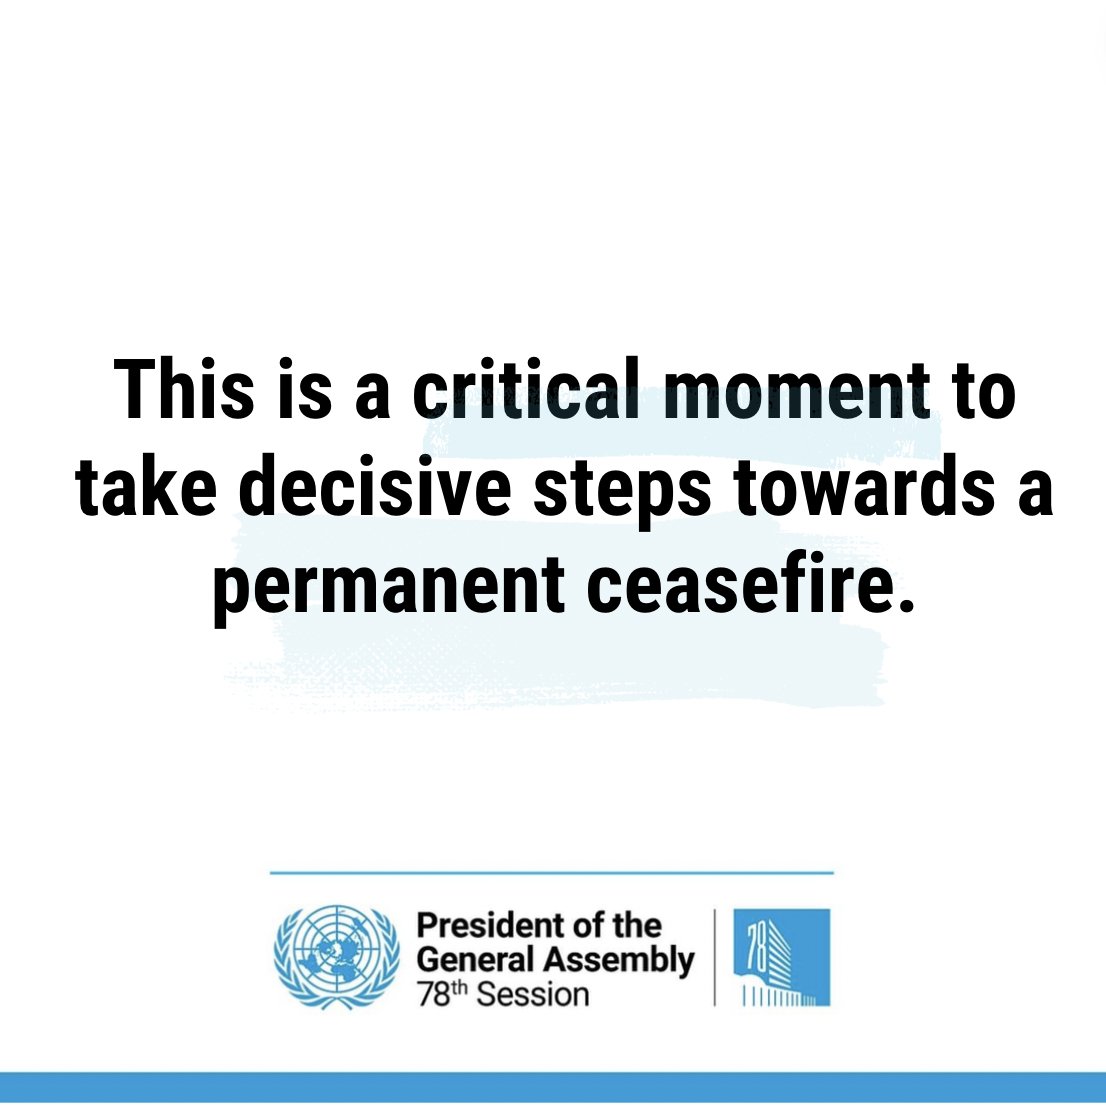 Deeply concerned about Israel’s imminent incursion targeting the eastern part of Rafah, a city where over 1 million displaced Palestinians are sheltering and already in most dire conditions. Let’s be clear - such an inconsiderate operation simply means more humanitarian